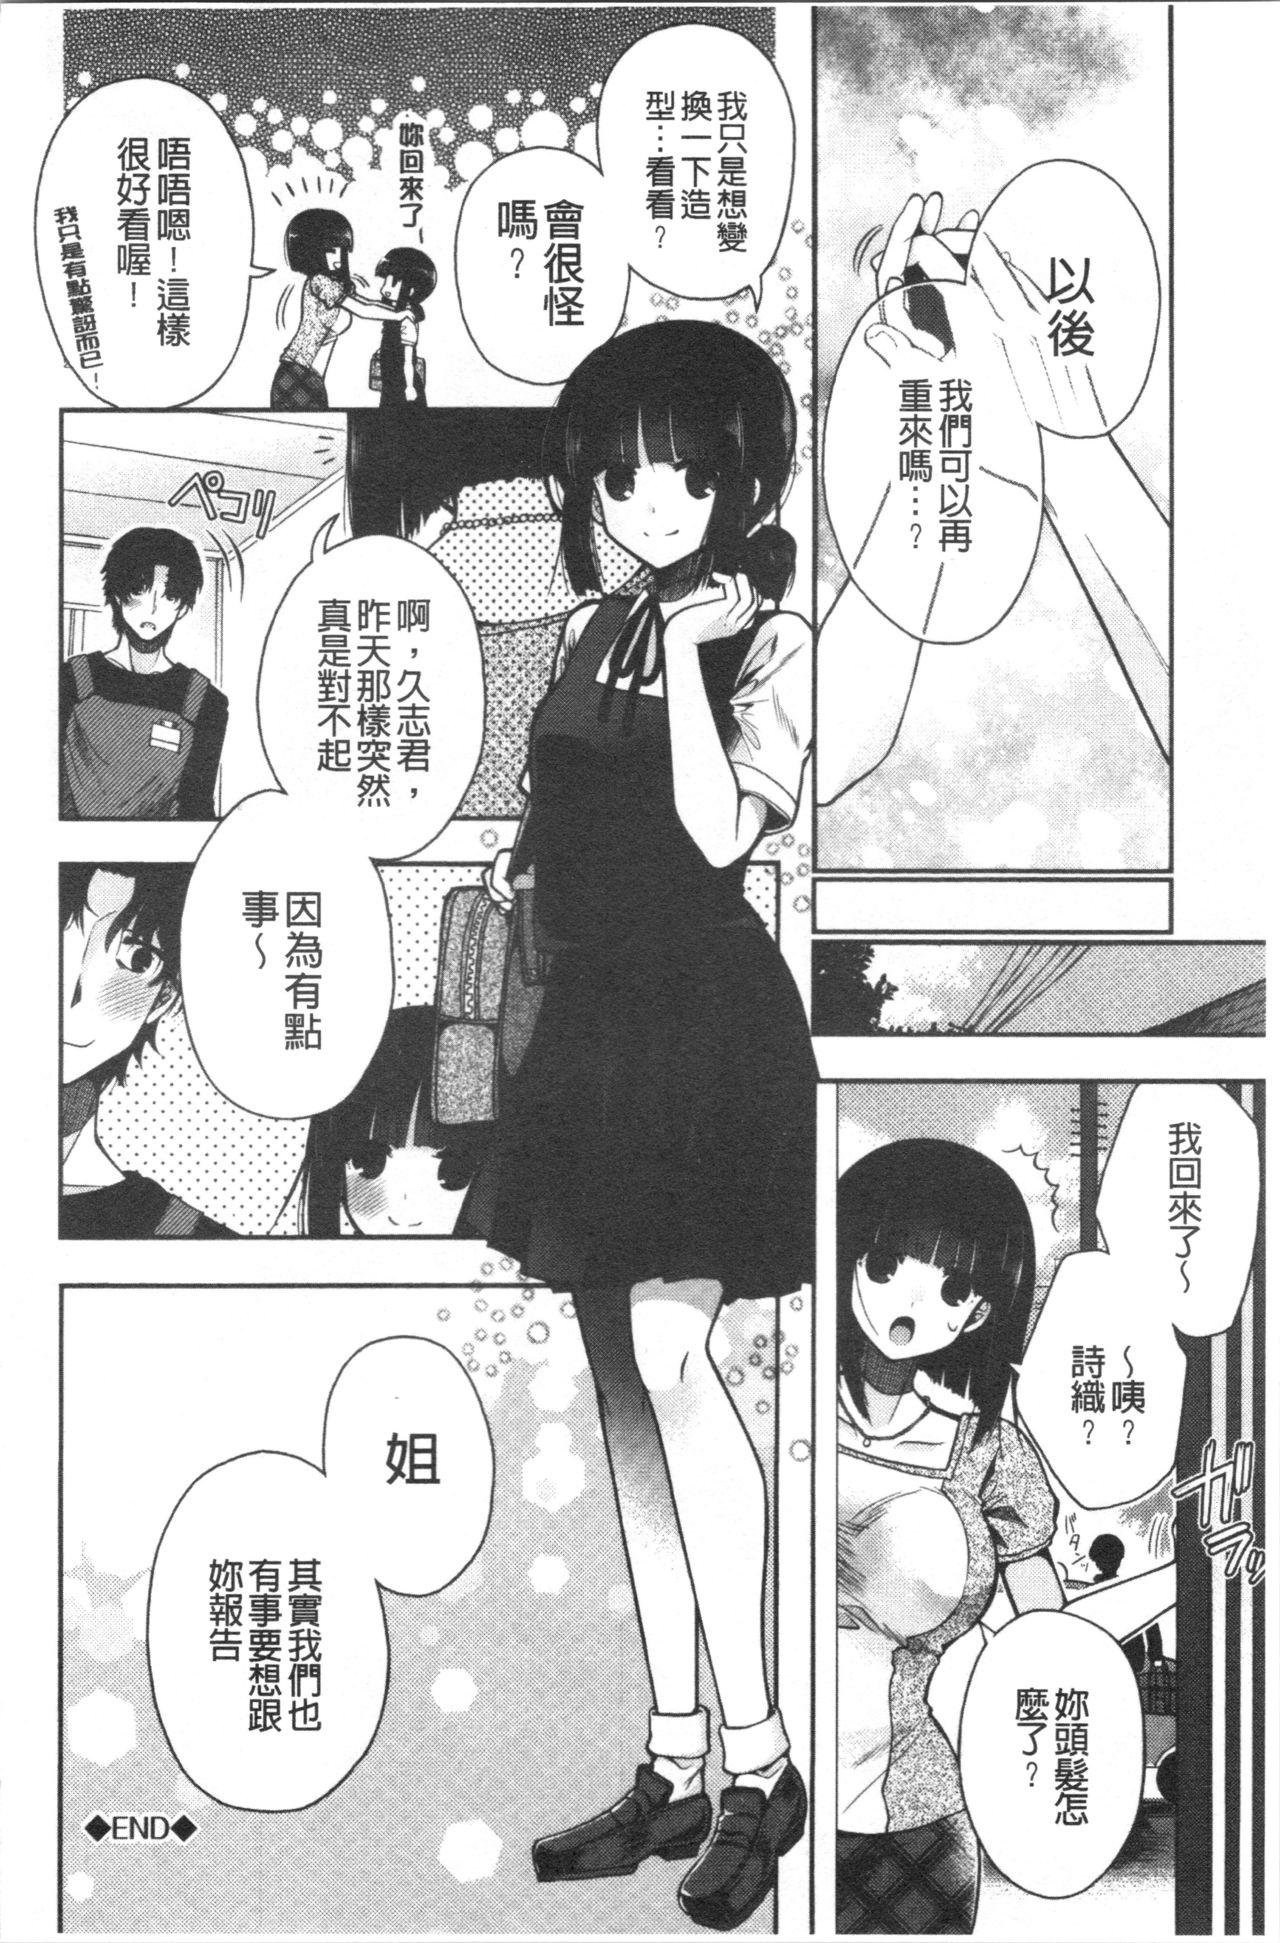 Hatsukoi Melty - Melty First Love 115